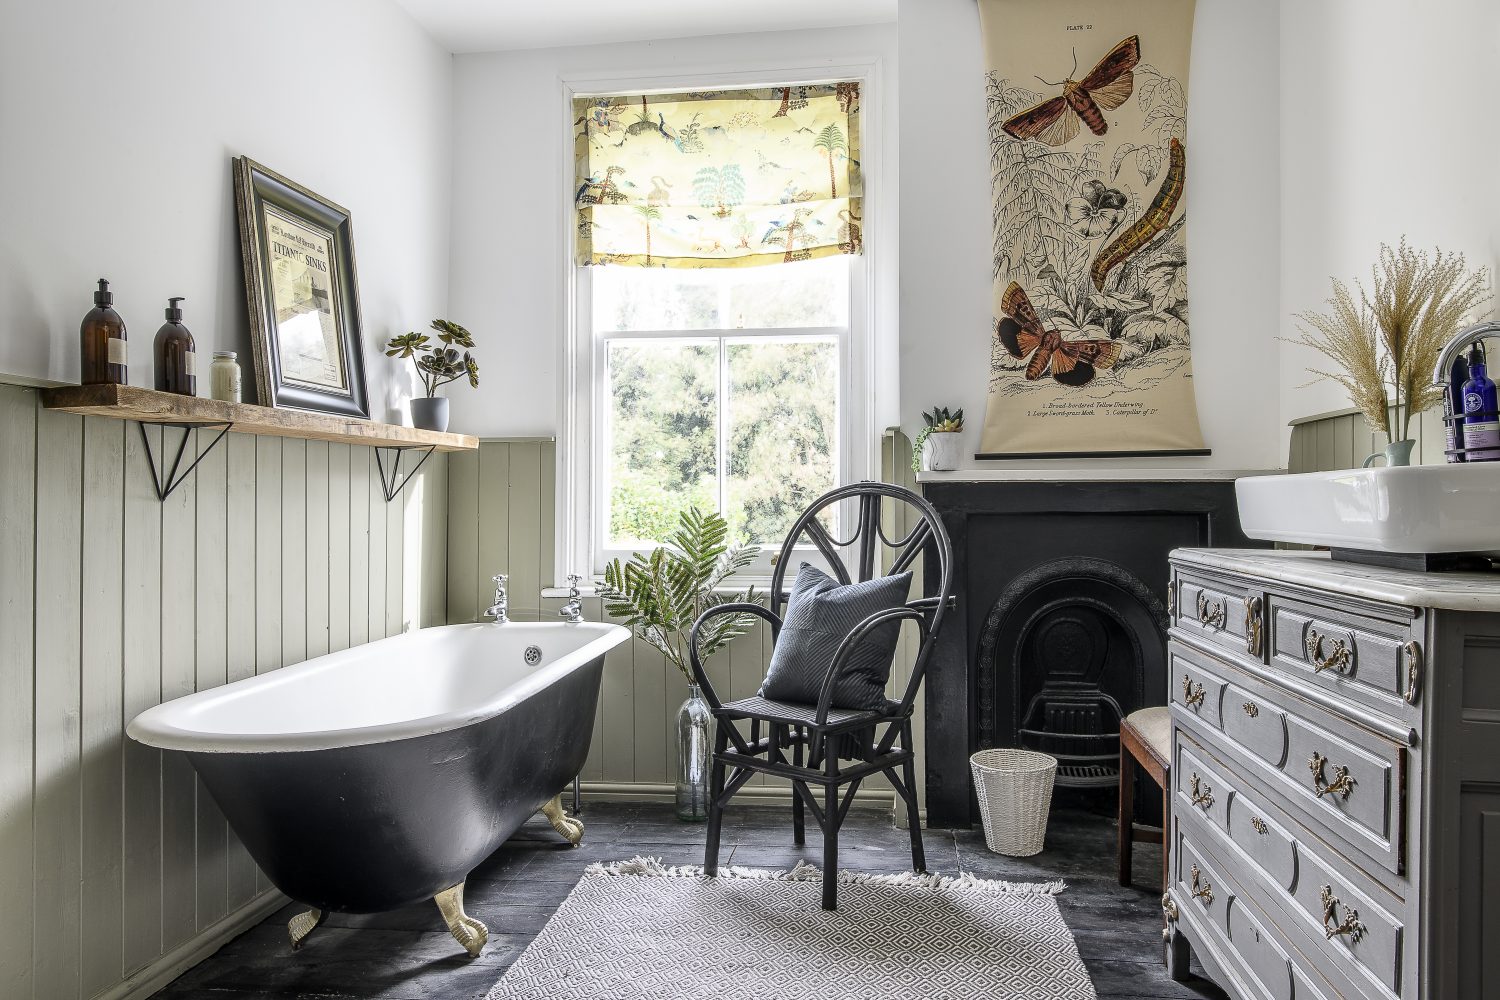 The family bathroom features another freestanding bath, this time in black with gold claw feet – a pleasing contrast to the pale sage green panelling and in keeping with the original cast iron fireplace